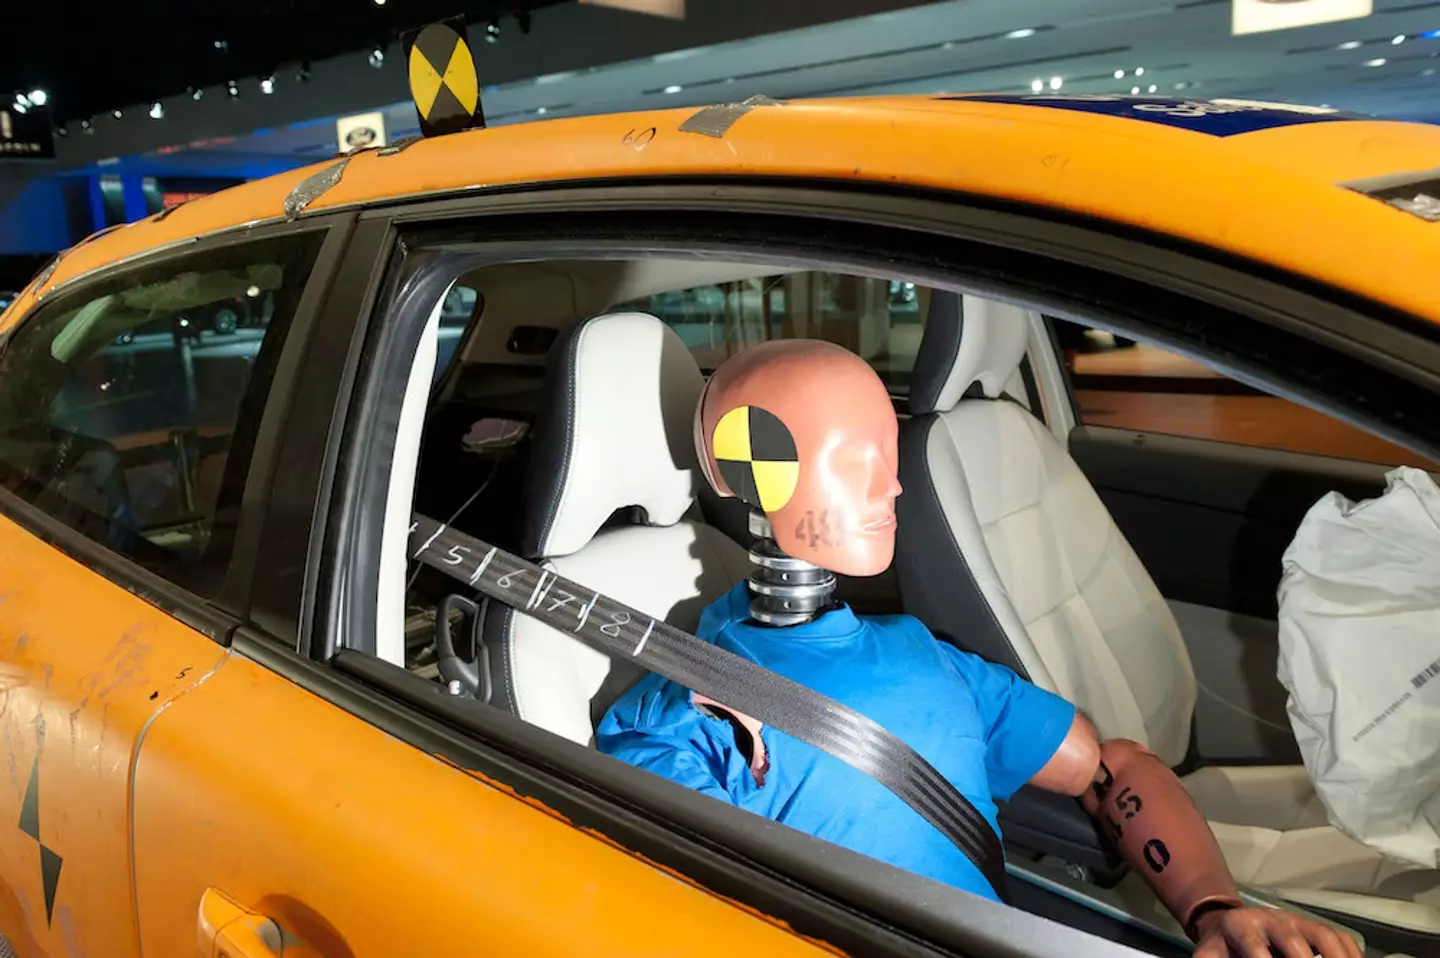 Up until now crash test dummies have been modelled on the average male.